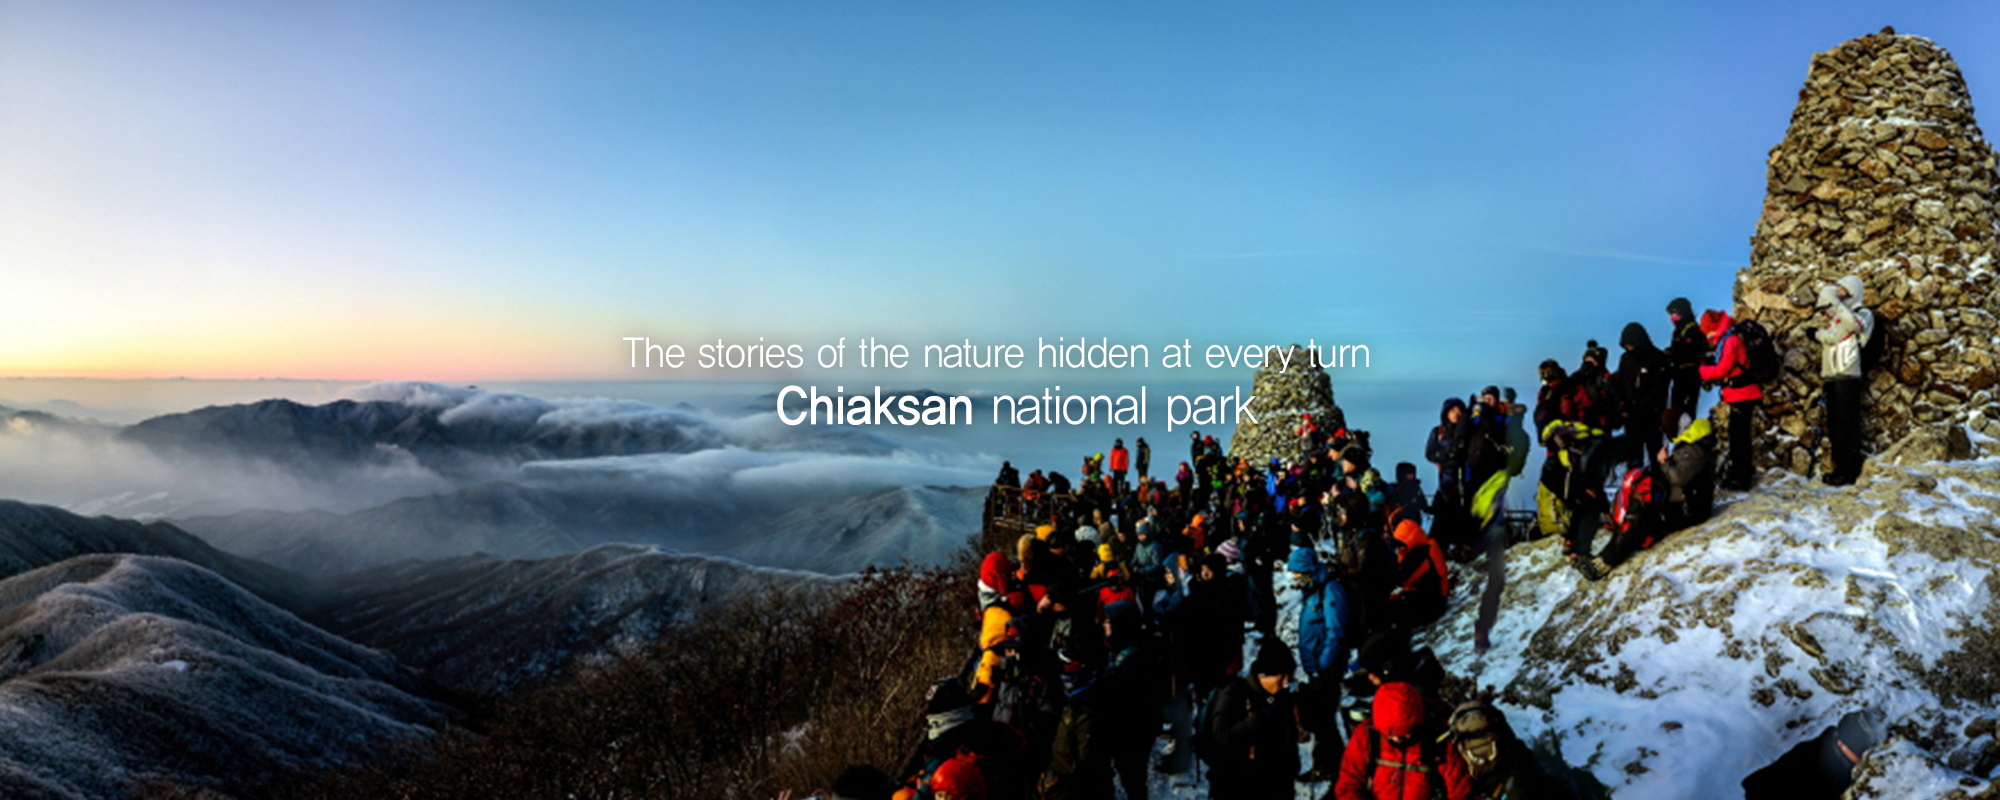 The stories of the nature hidden at every turn - Chiaksan national par